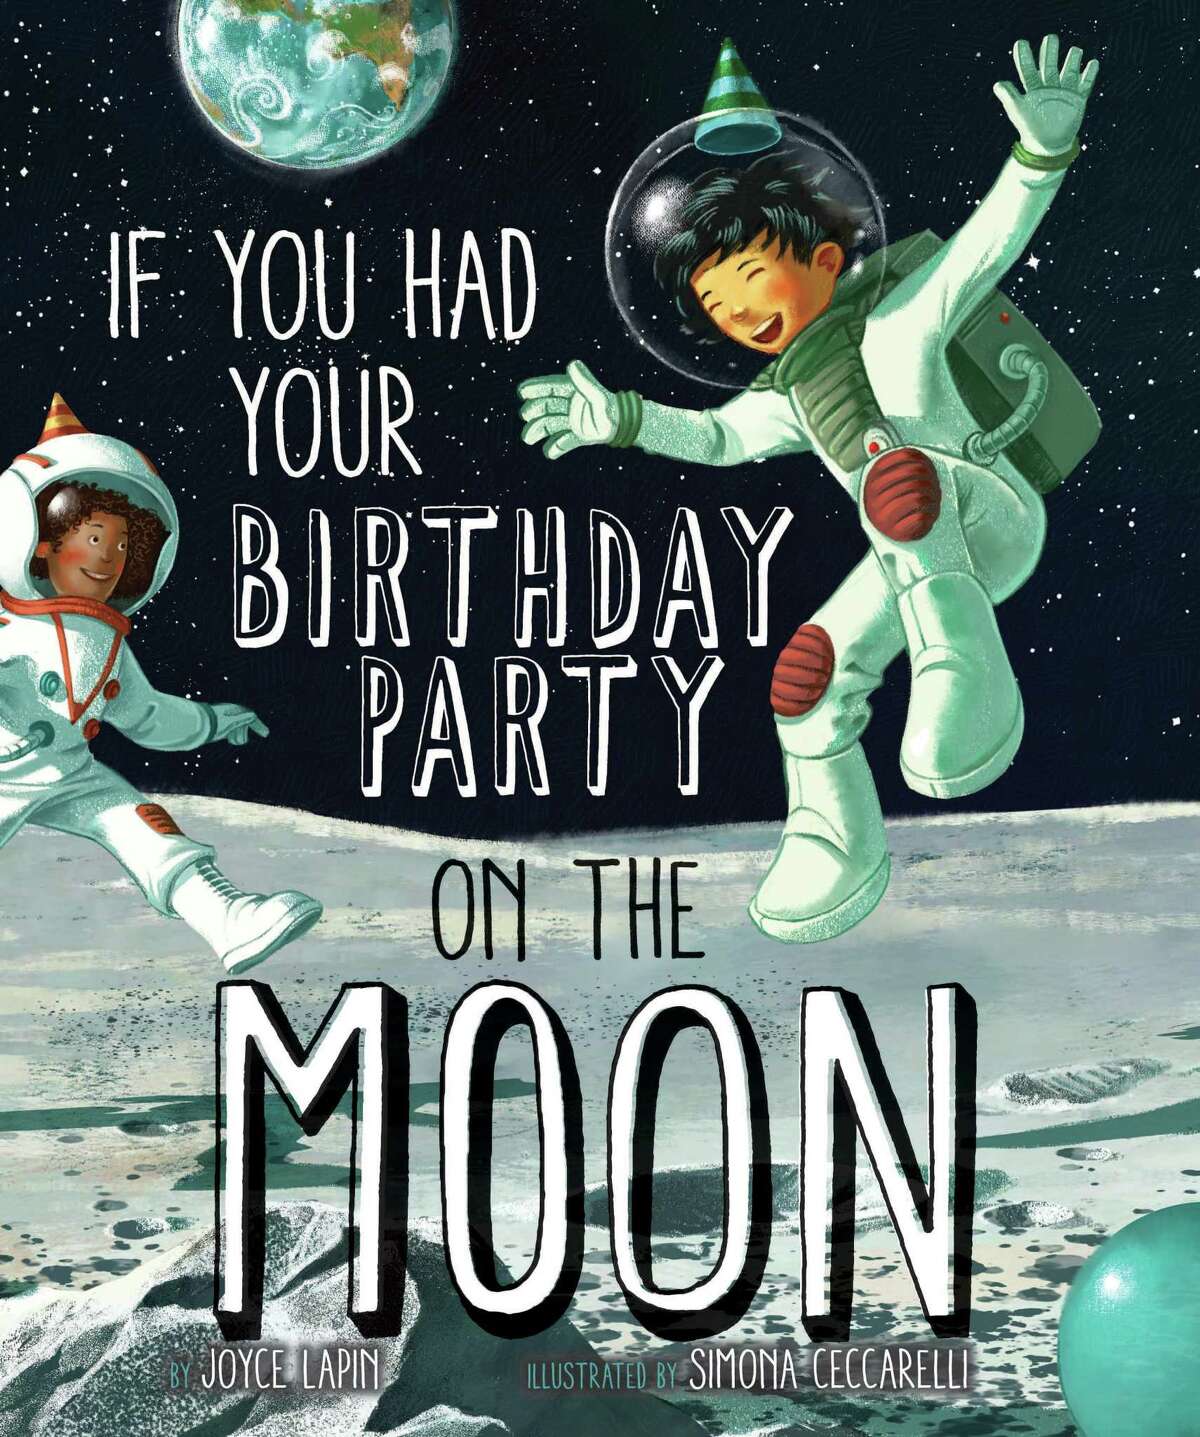 CHILDREN'S BOOKS: "If You Had a Birthday Party on the Moon" by Joyce Lapin and illustrated by Simona Ceccarelli, $16.95